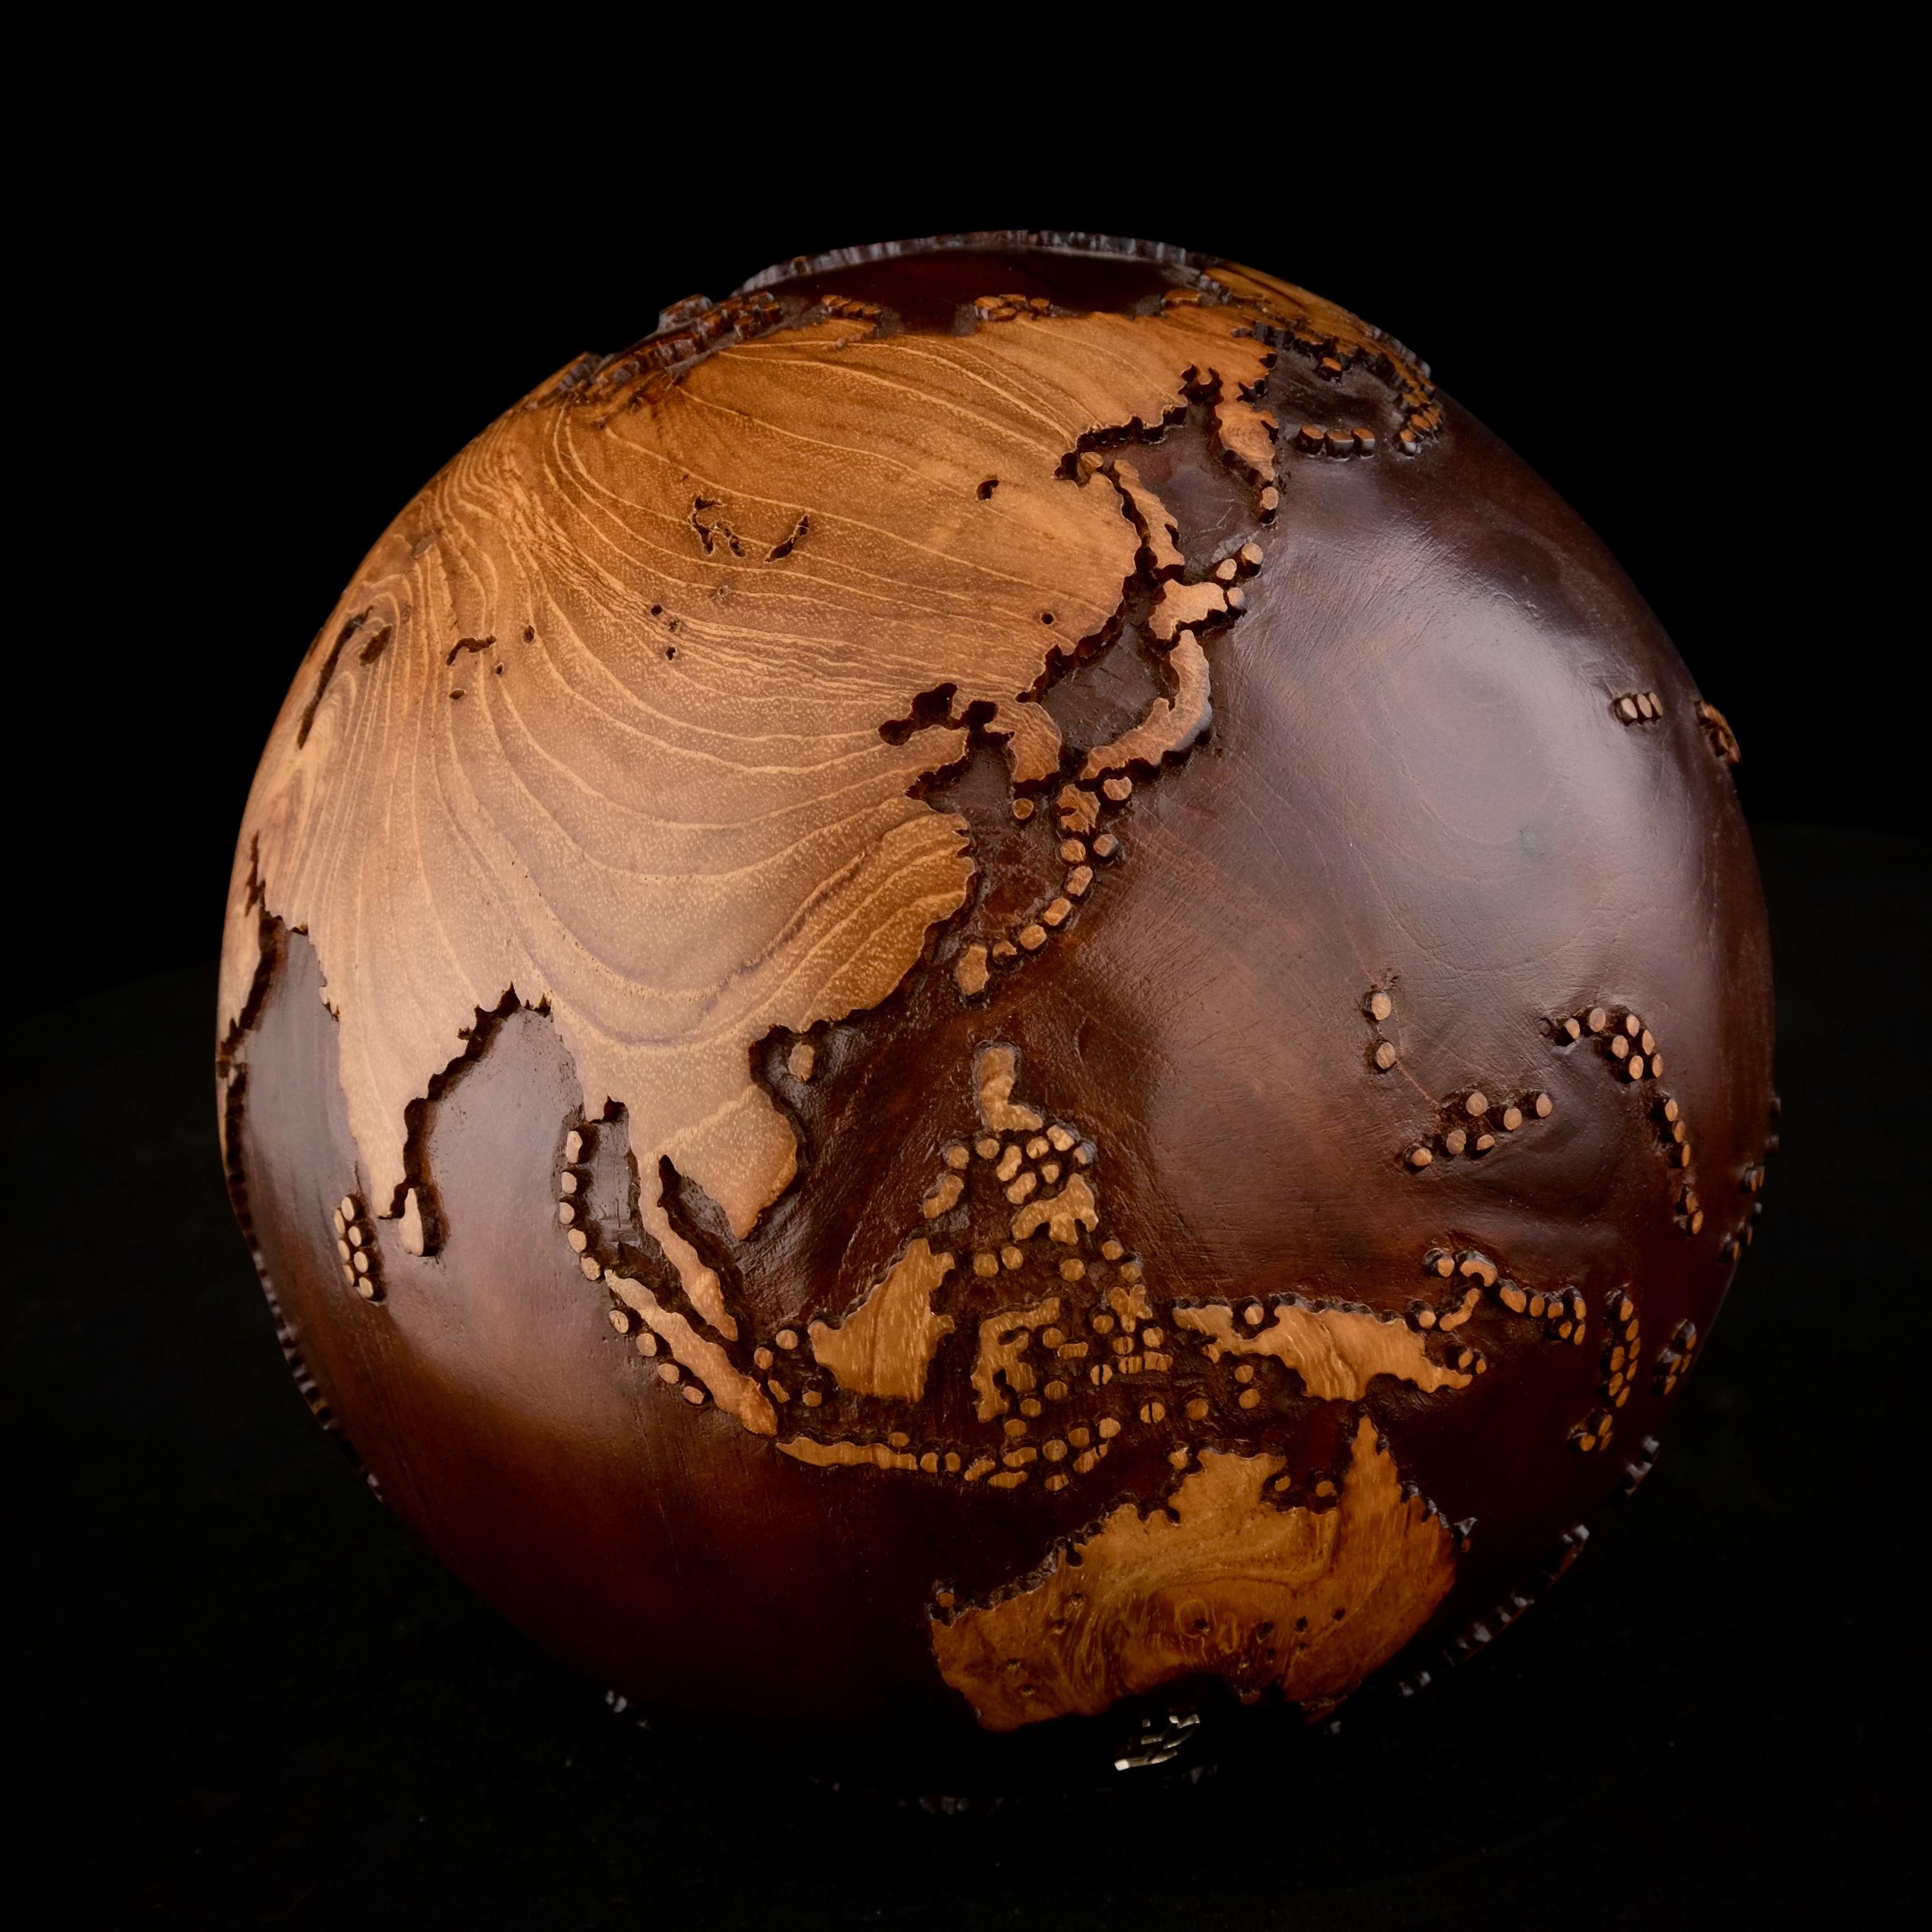 Walnut stain makes this beautiful turning globe a real stunning sculpture.
Made from a whole piece of wood the way the sculpture is shaped is defined by how the tree grew.
Sitting on a turning base the sculpture can spin silently around, so that all